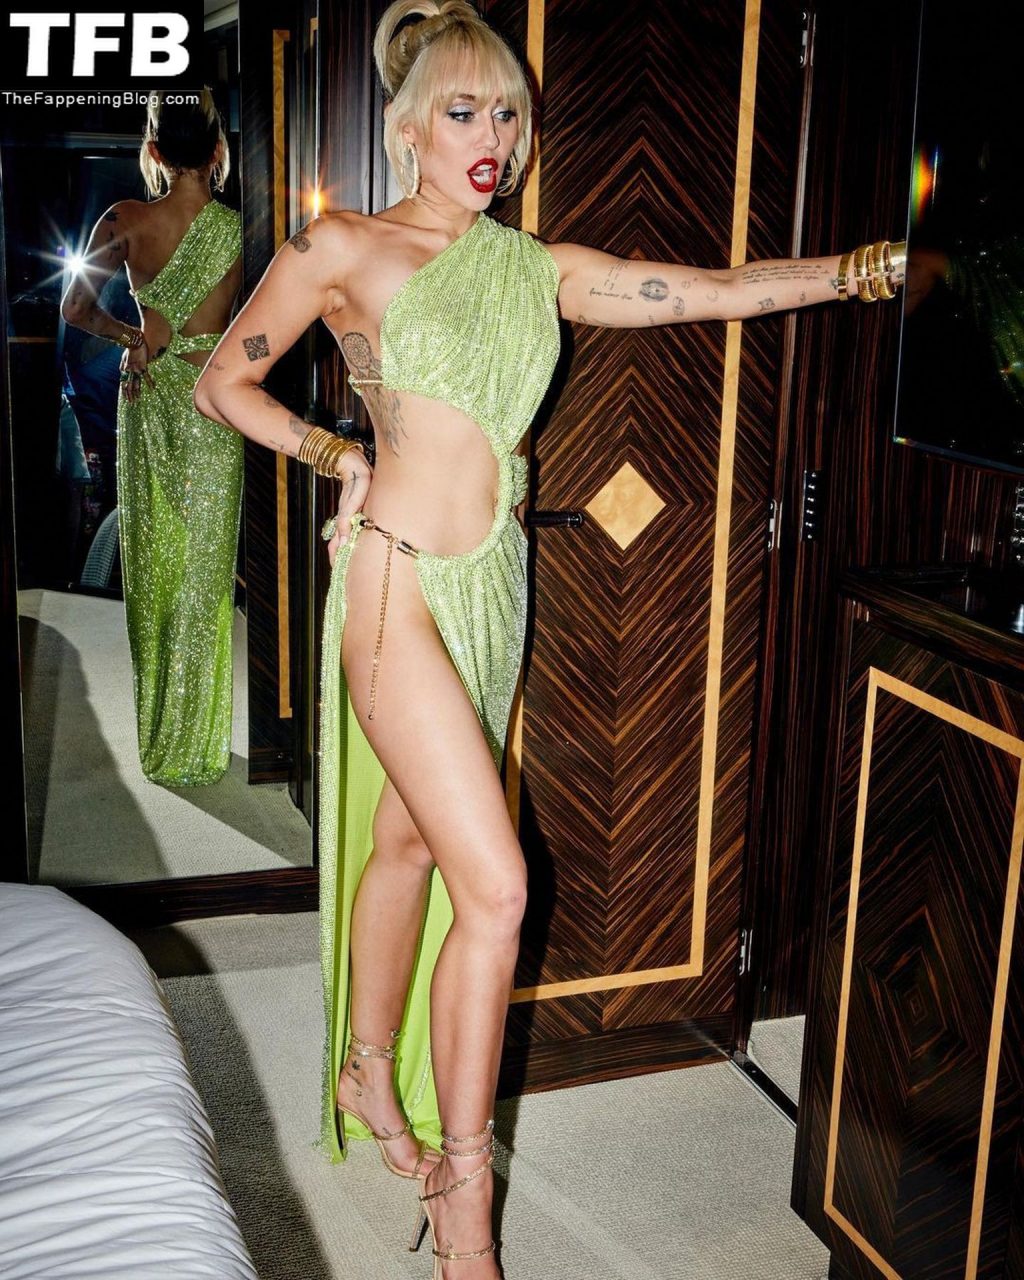 Miley Cyrus Poses Without Underwear in a Sexy Revealing Dress (10 Photos + Video)